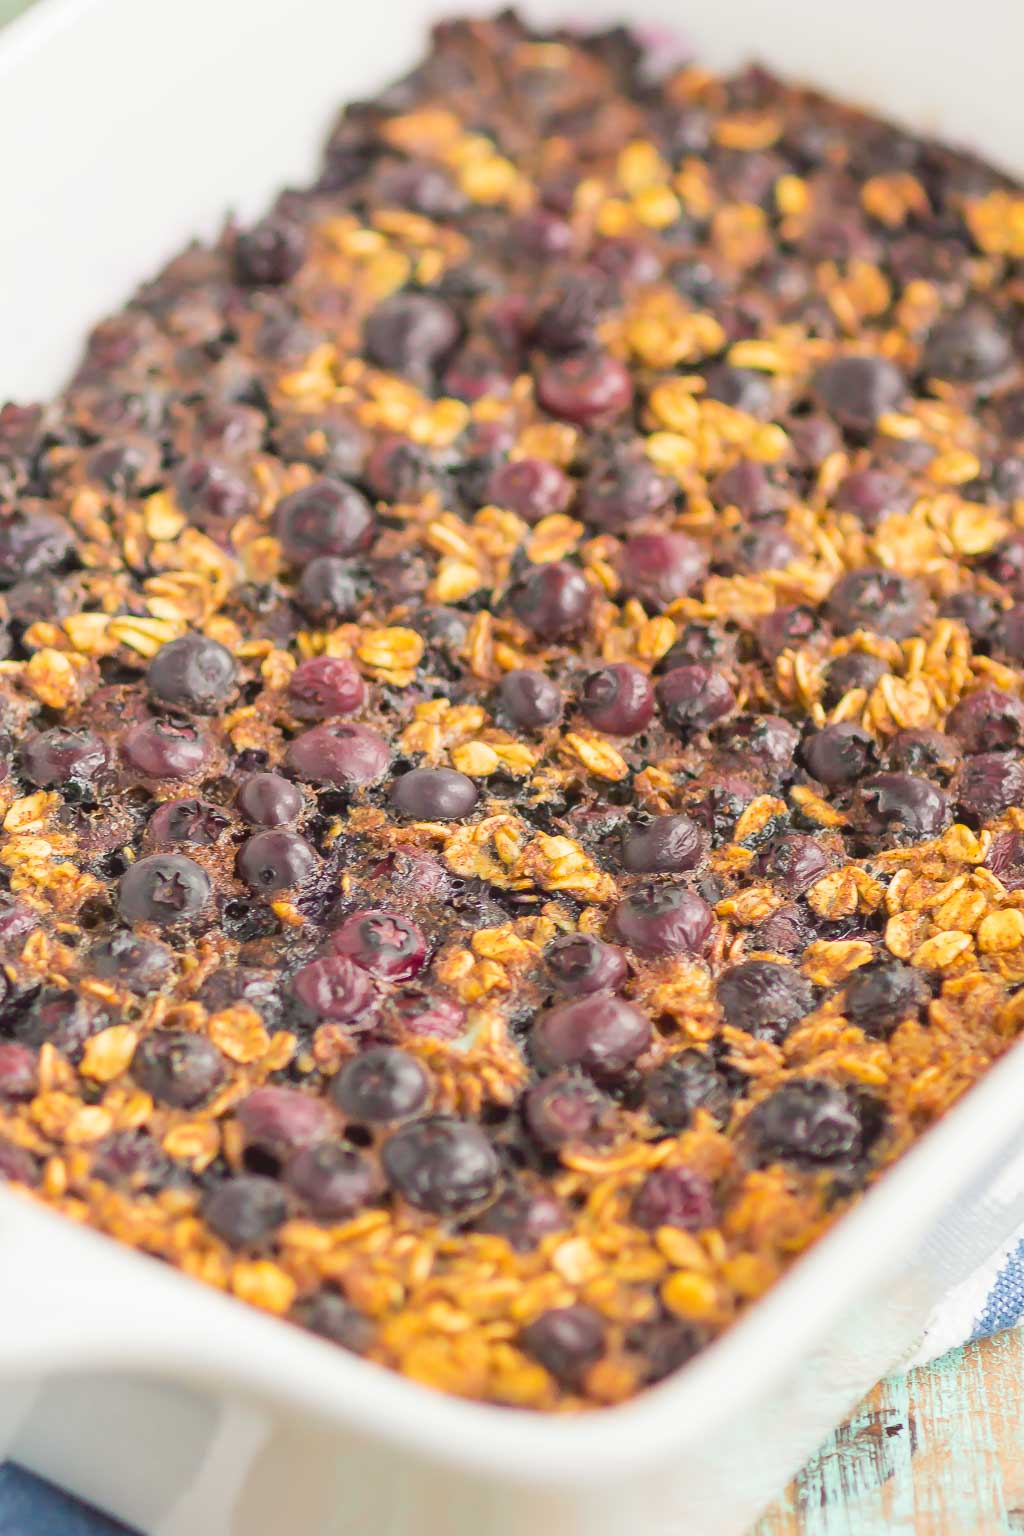 Blueberry Baked Oatmeal is an easy, make-ahead dish that's perfect for busy mornings. Tangy blueberries and hearty oats are sweetened with just the right amount of cozy spices. Serve this baked oatmeal with a drizzle of honey or maple syrup for a hearty breakfast!